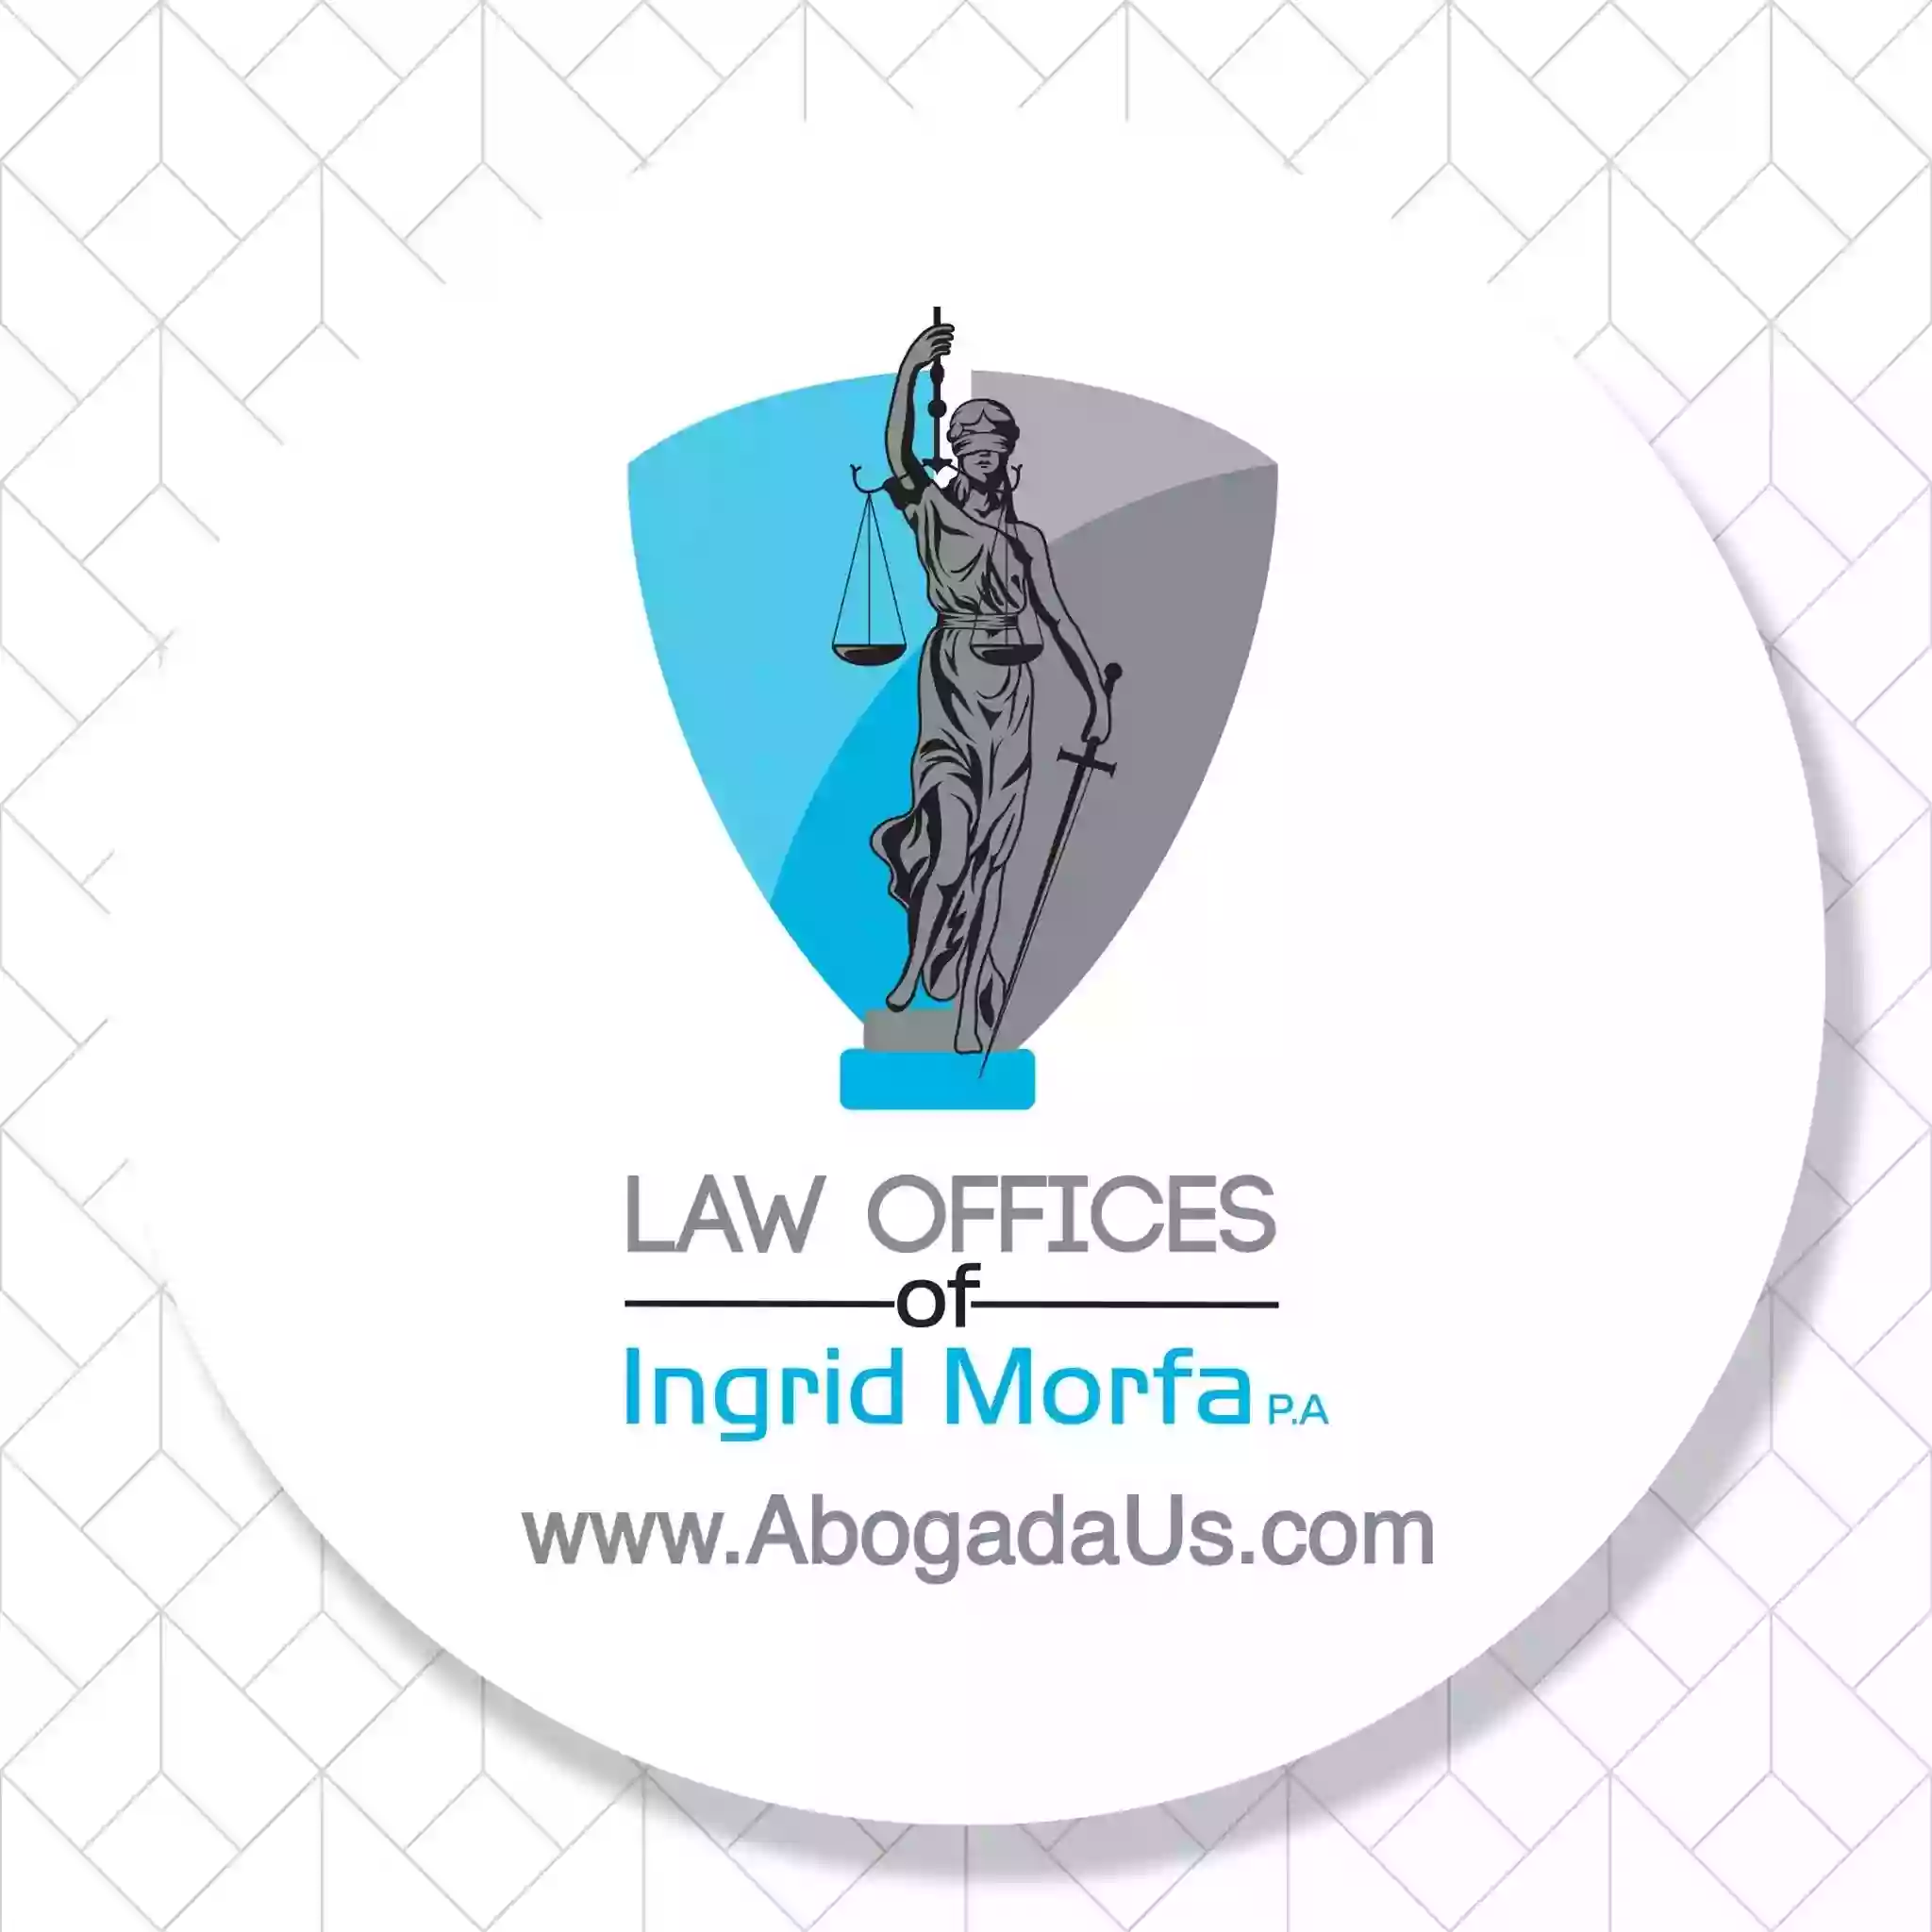 Law Offices of Ingrid Morfa, PA - ABOGADAUS